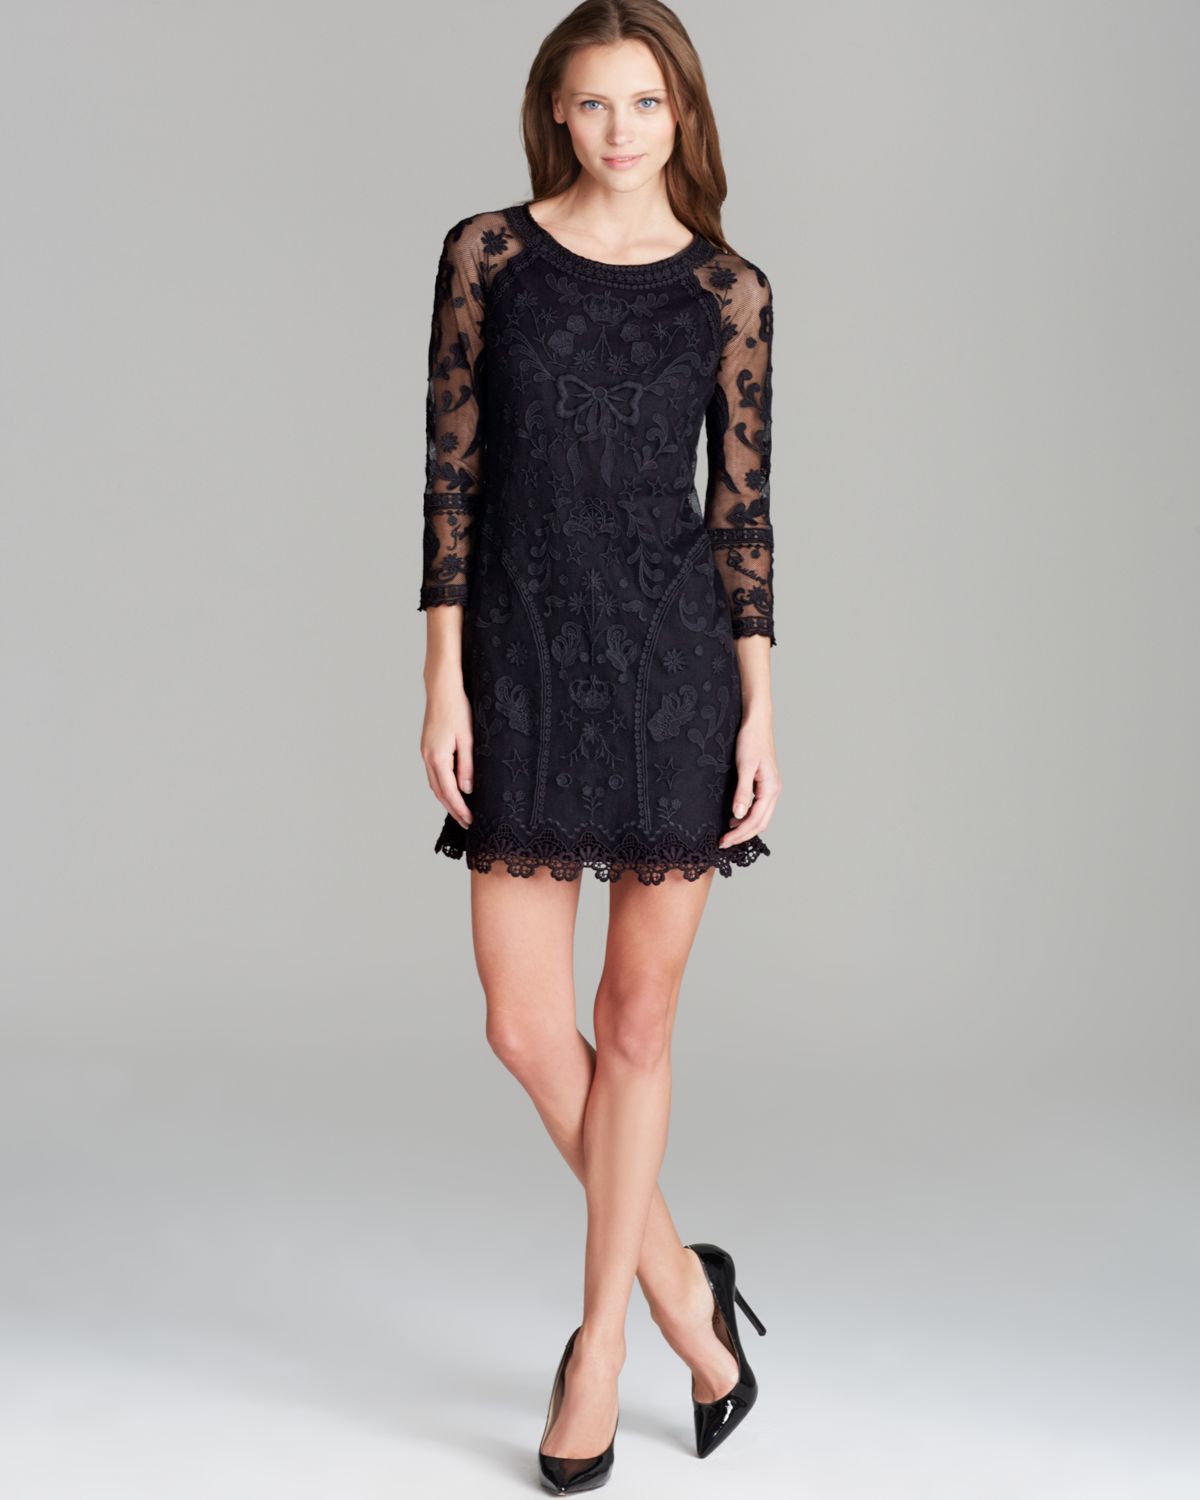 Lyst - Juicy Couture Dress Lace in Black